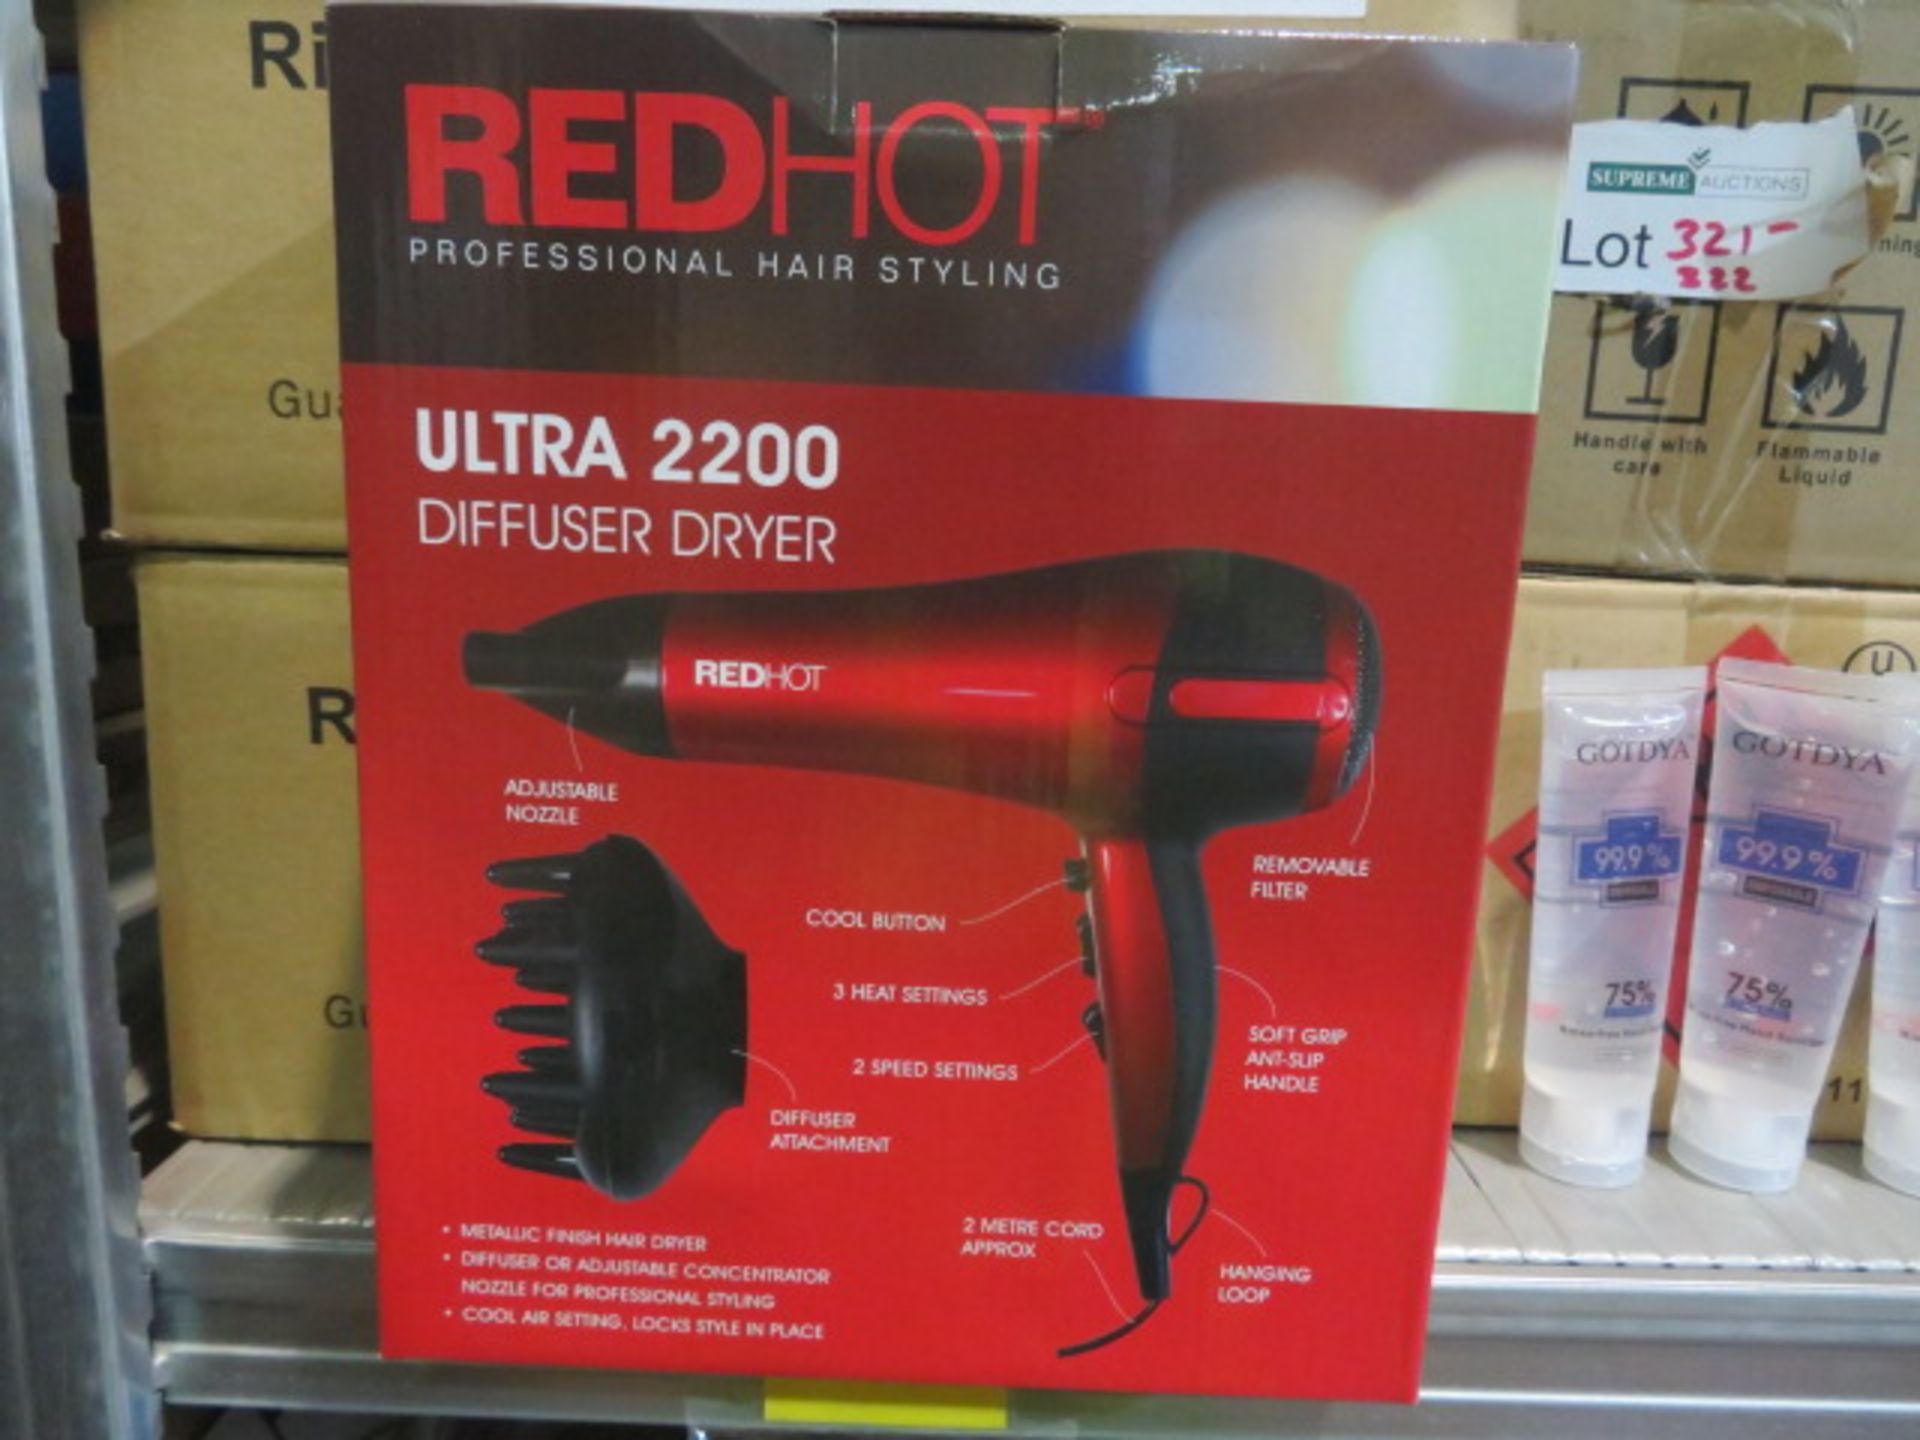 RED HOT PROFESSIONAL HAIR STYLING ULTRA 2200 DIFFUSER HAIR DRYER